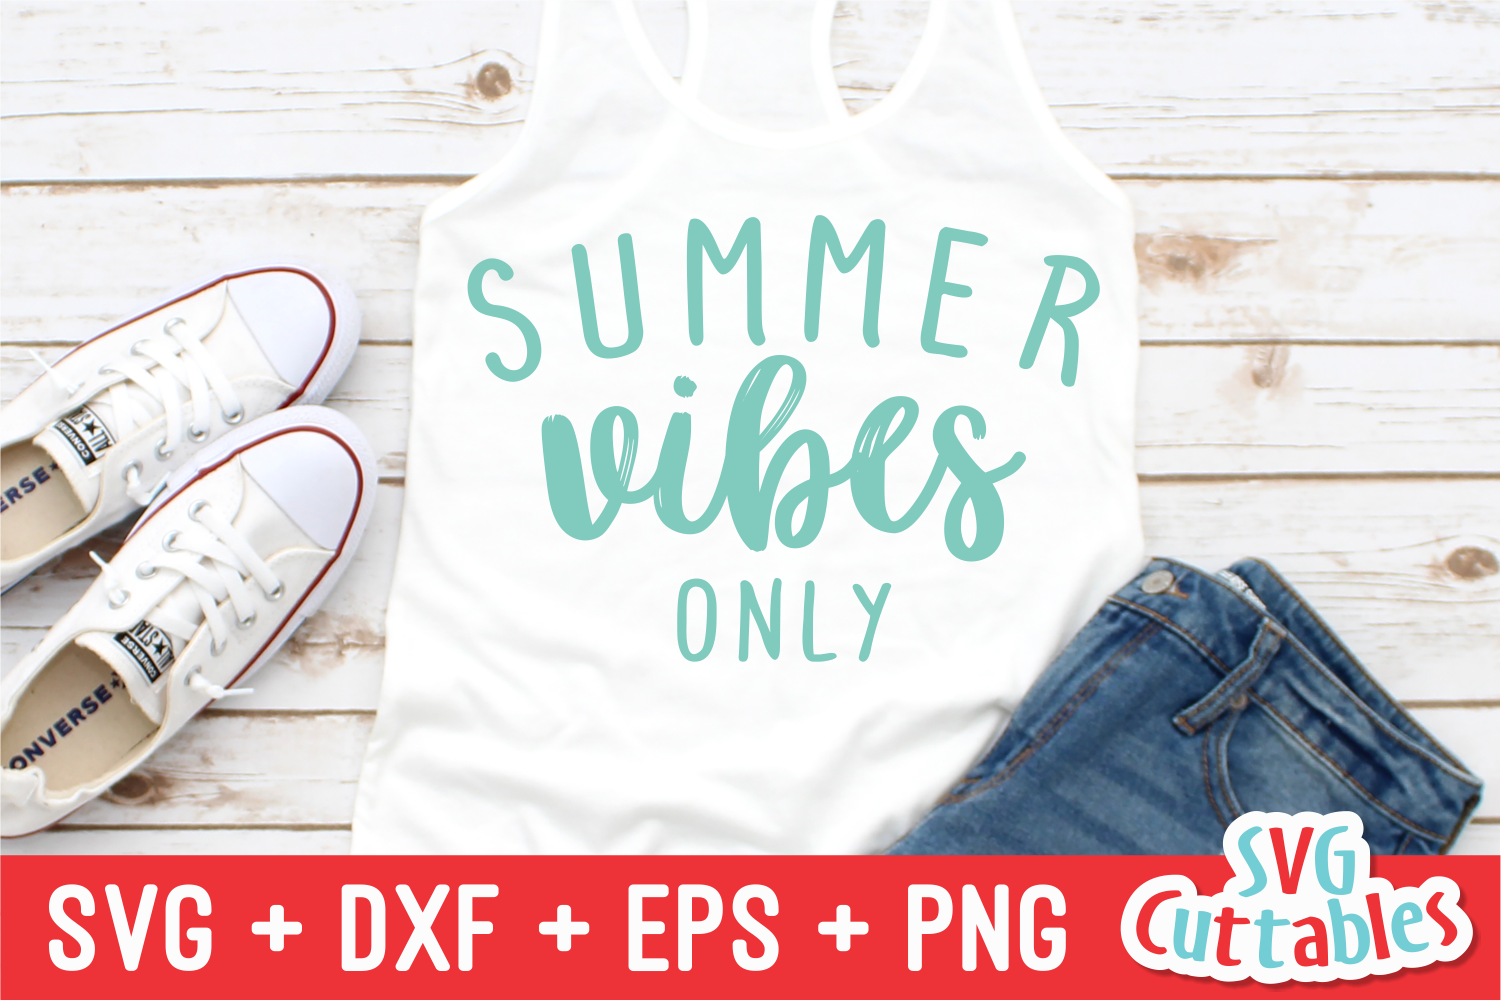 Download Summer Vibes Only | SVG Cut File By Svg Cuttables | TheHungryJPEG.com